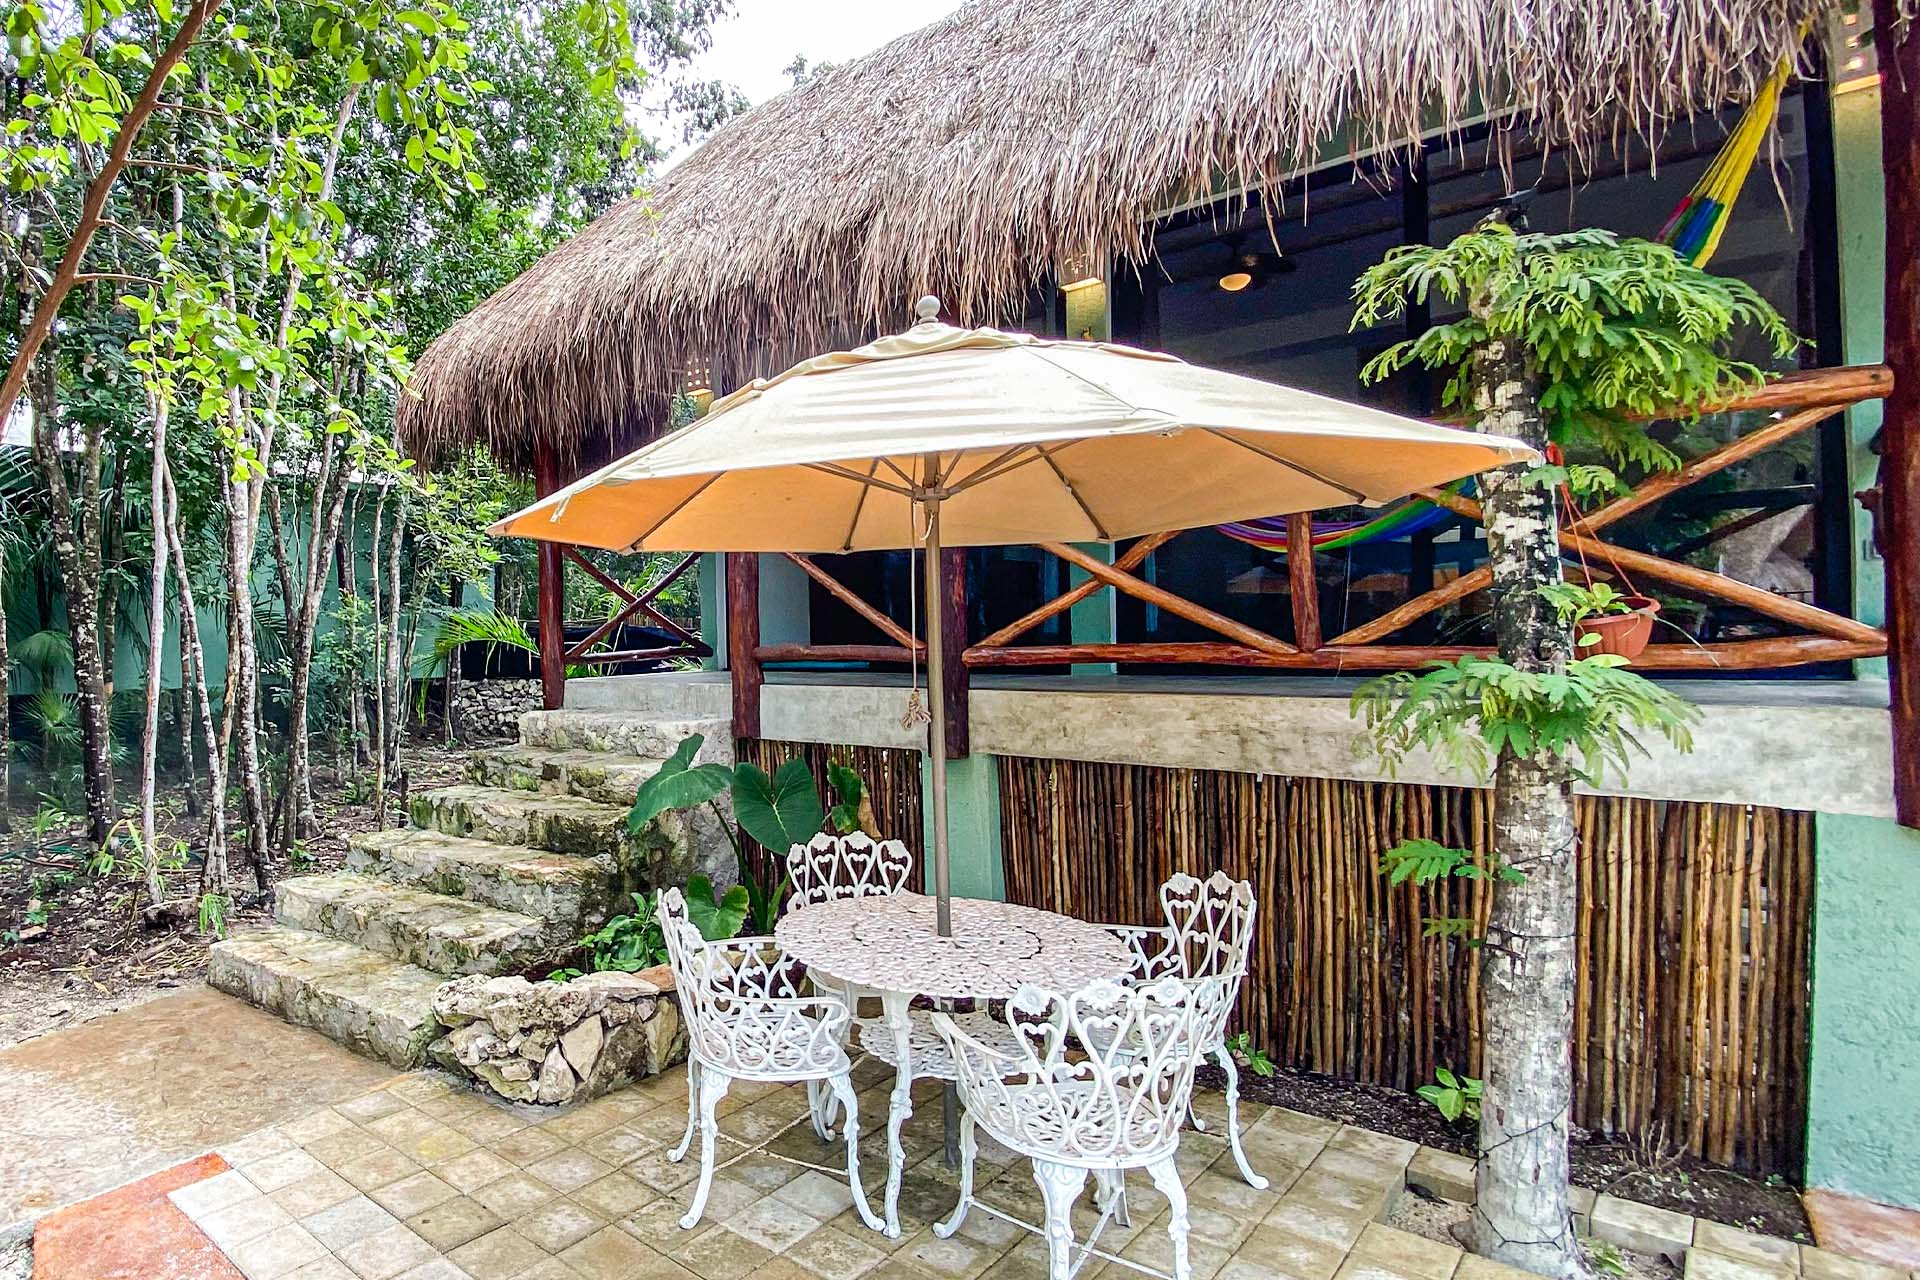 Villa Jaguar, accommodation in Cozumel, exterior, nature, in front, plants, stairs, Cozumel